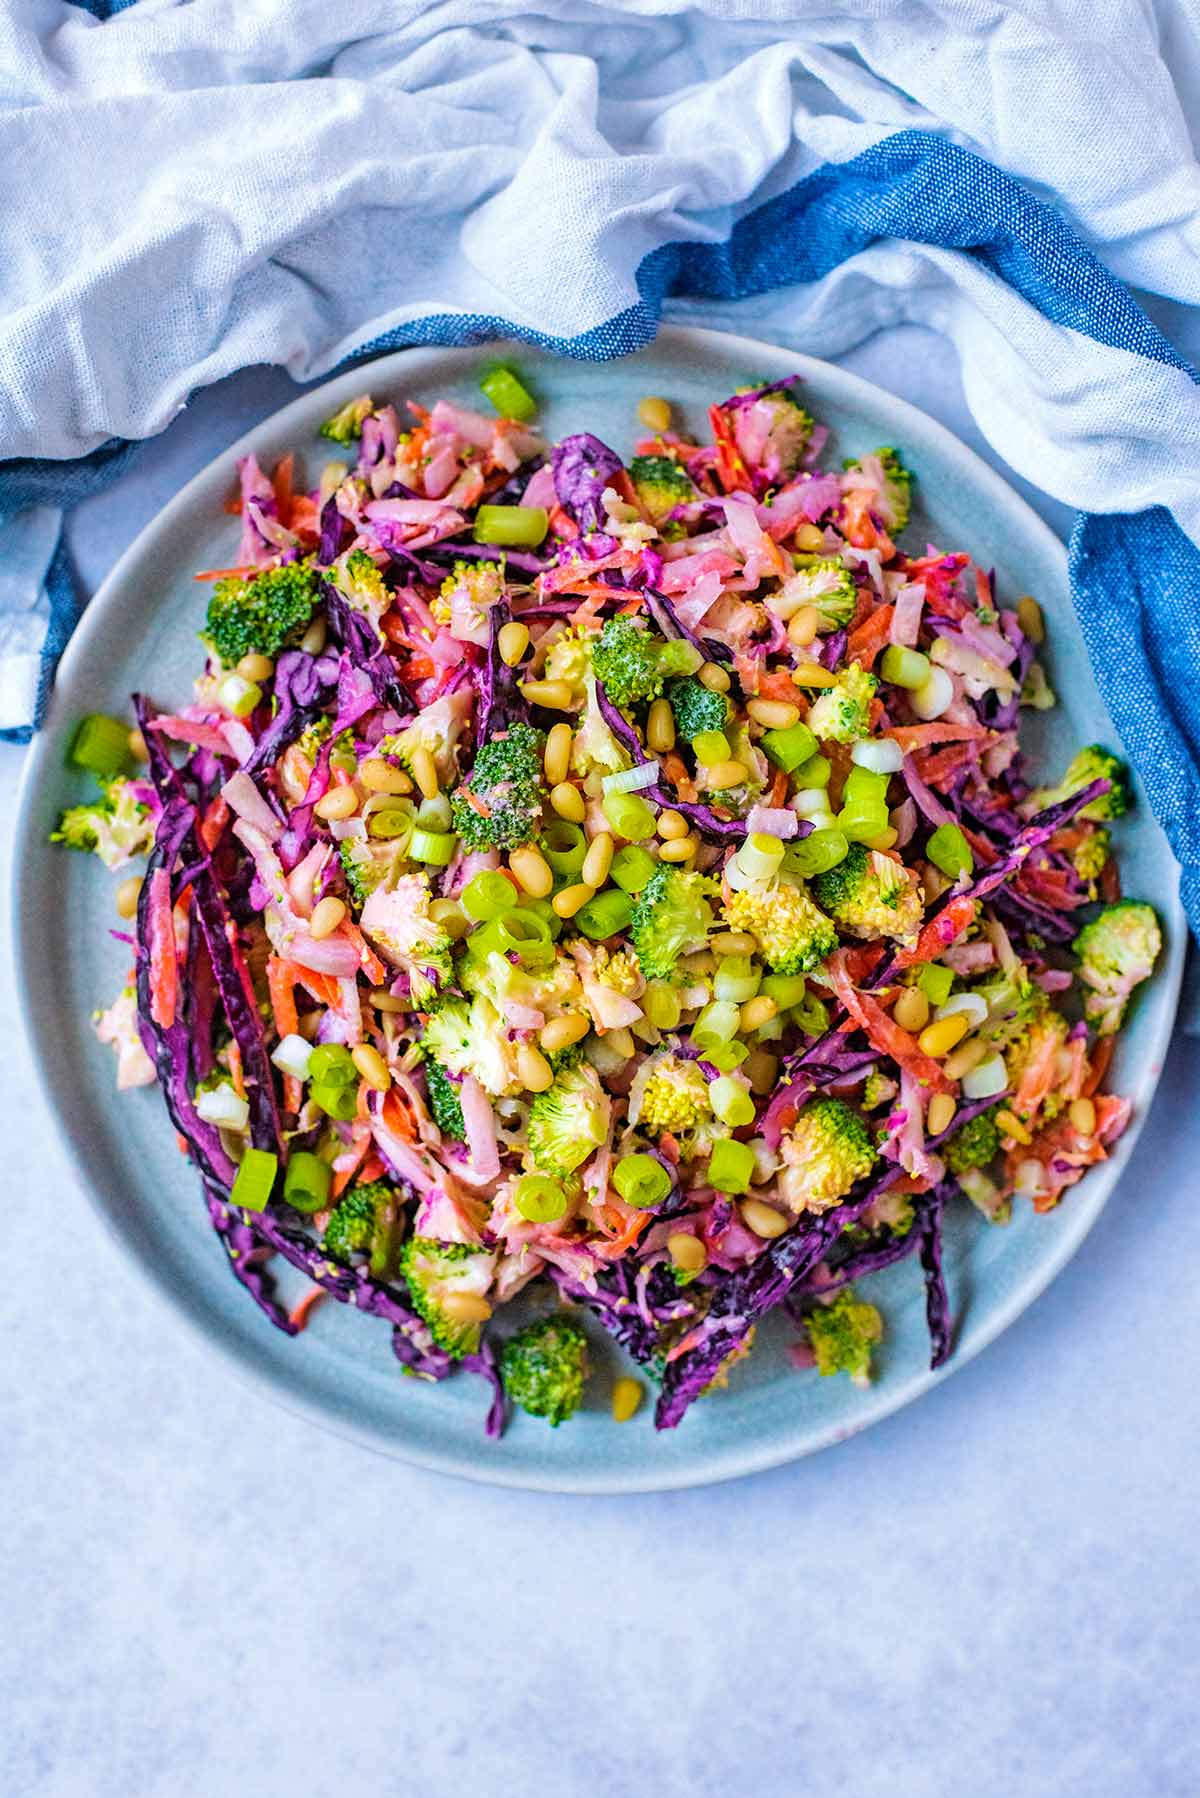 A large bowl of slaw containing broccoli, cabbage, onion carrot and pine nuts.